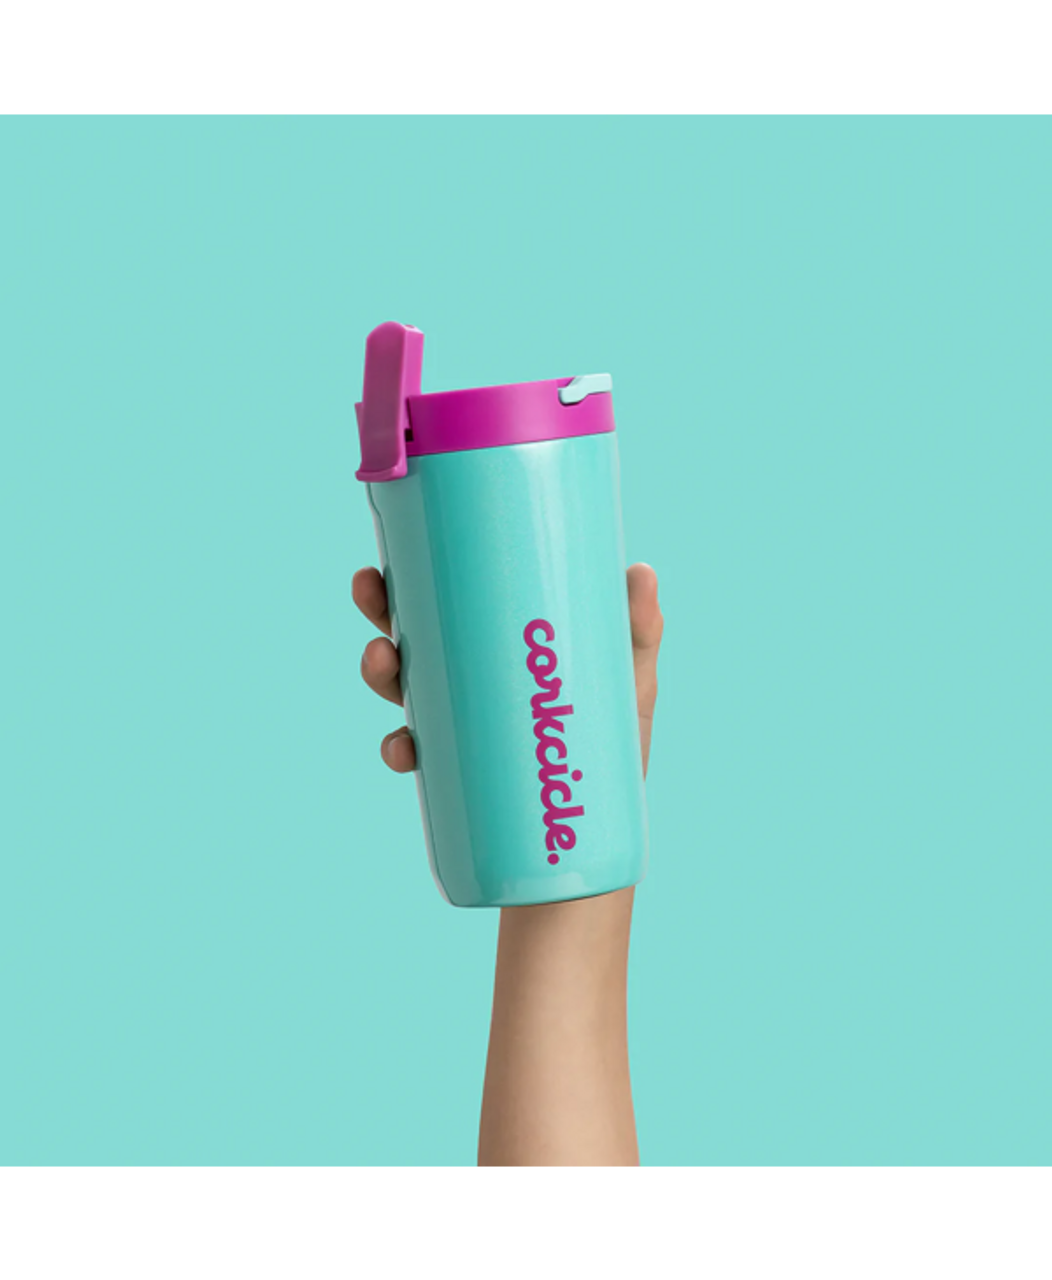 https://cdn11.bigcommerce.com/s-e0xlh4avpe/images/stencil/1280x1280/products/122987/167357/corkcicle-mermaid-kids-cup-12oz__14058.1669140115.png?c=1